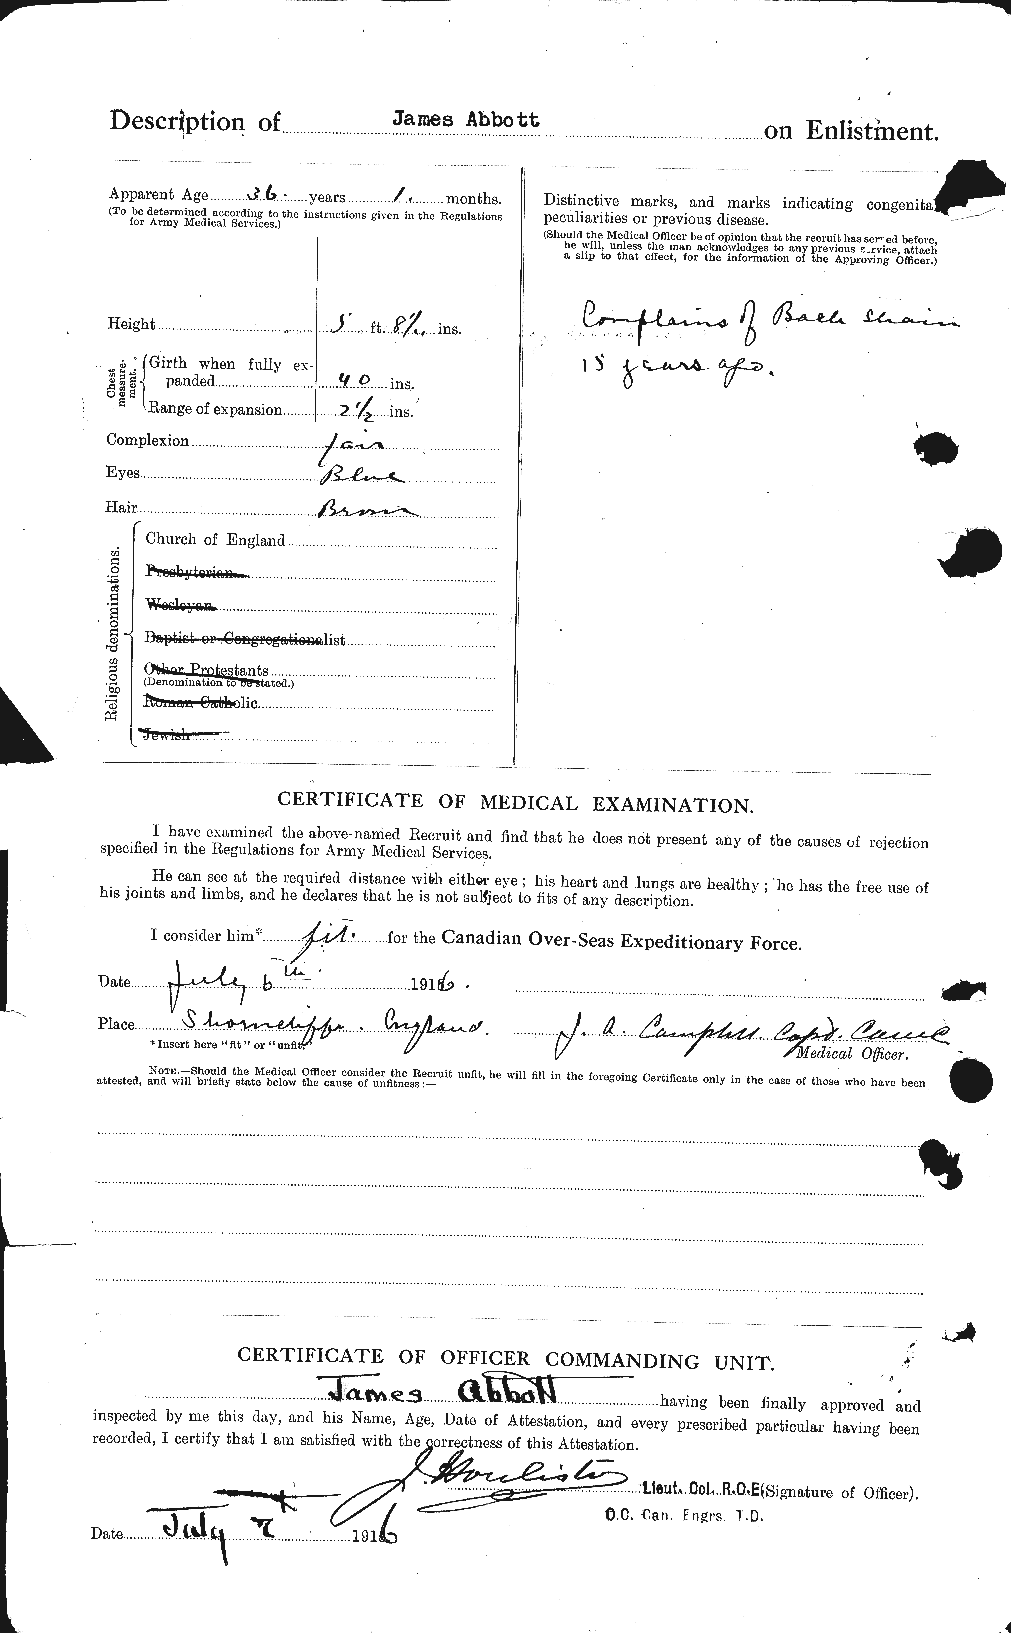 Personnel Records of the First World War - CEF 200973b